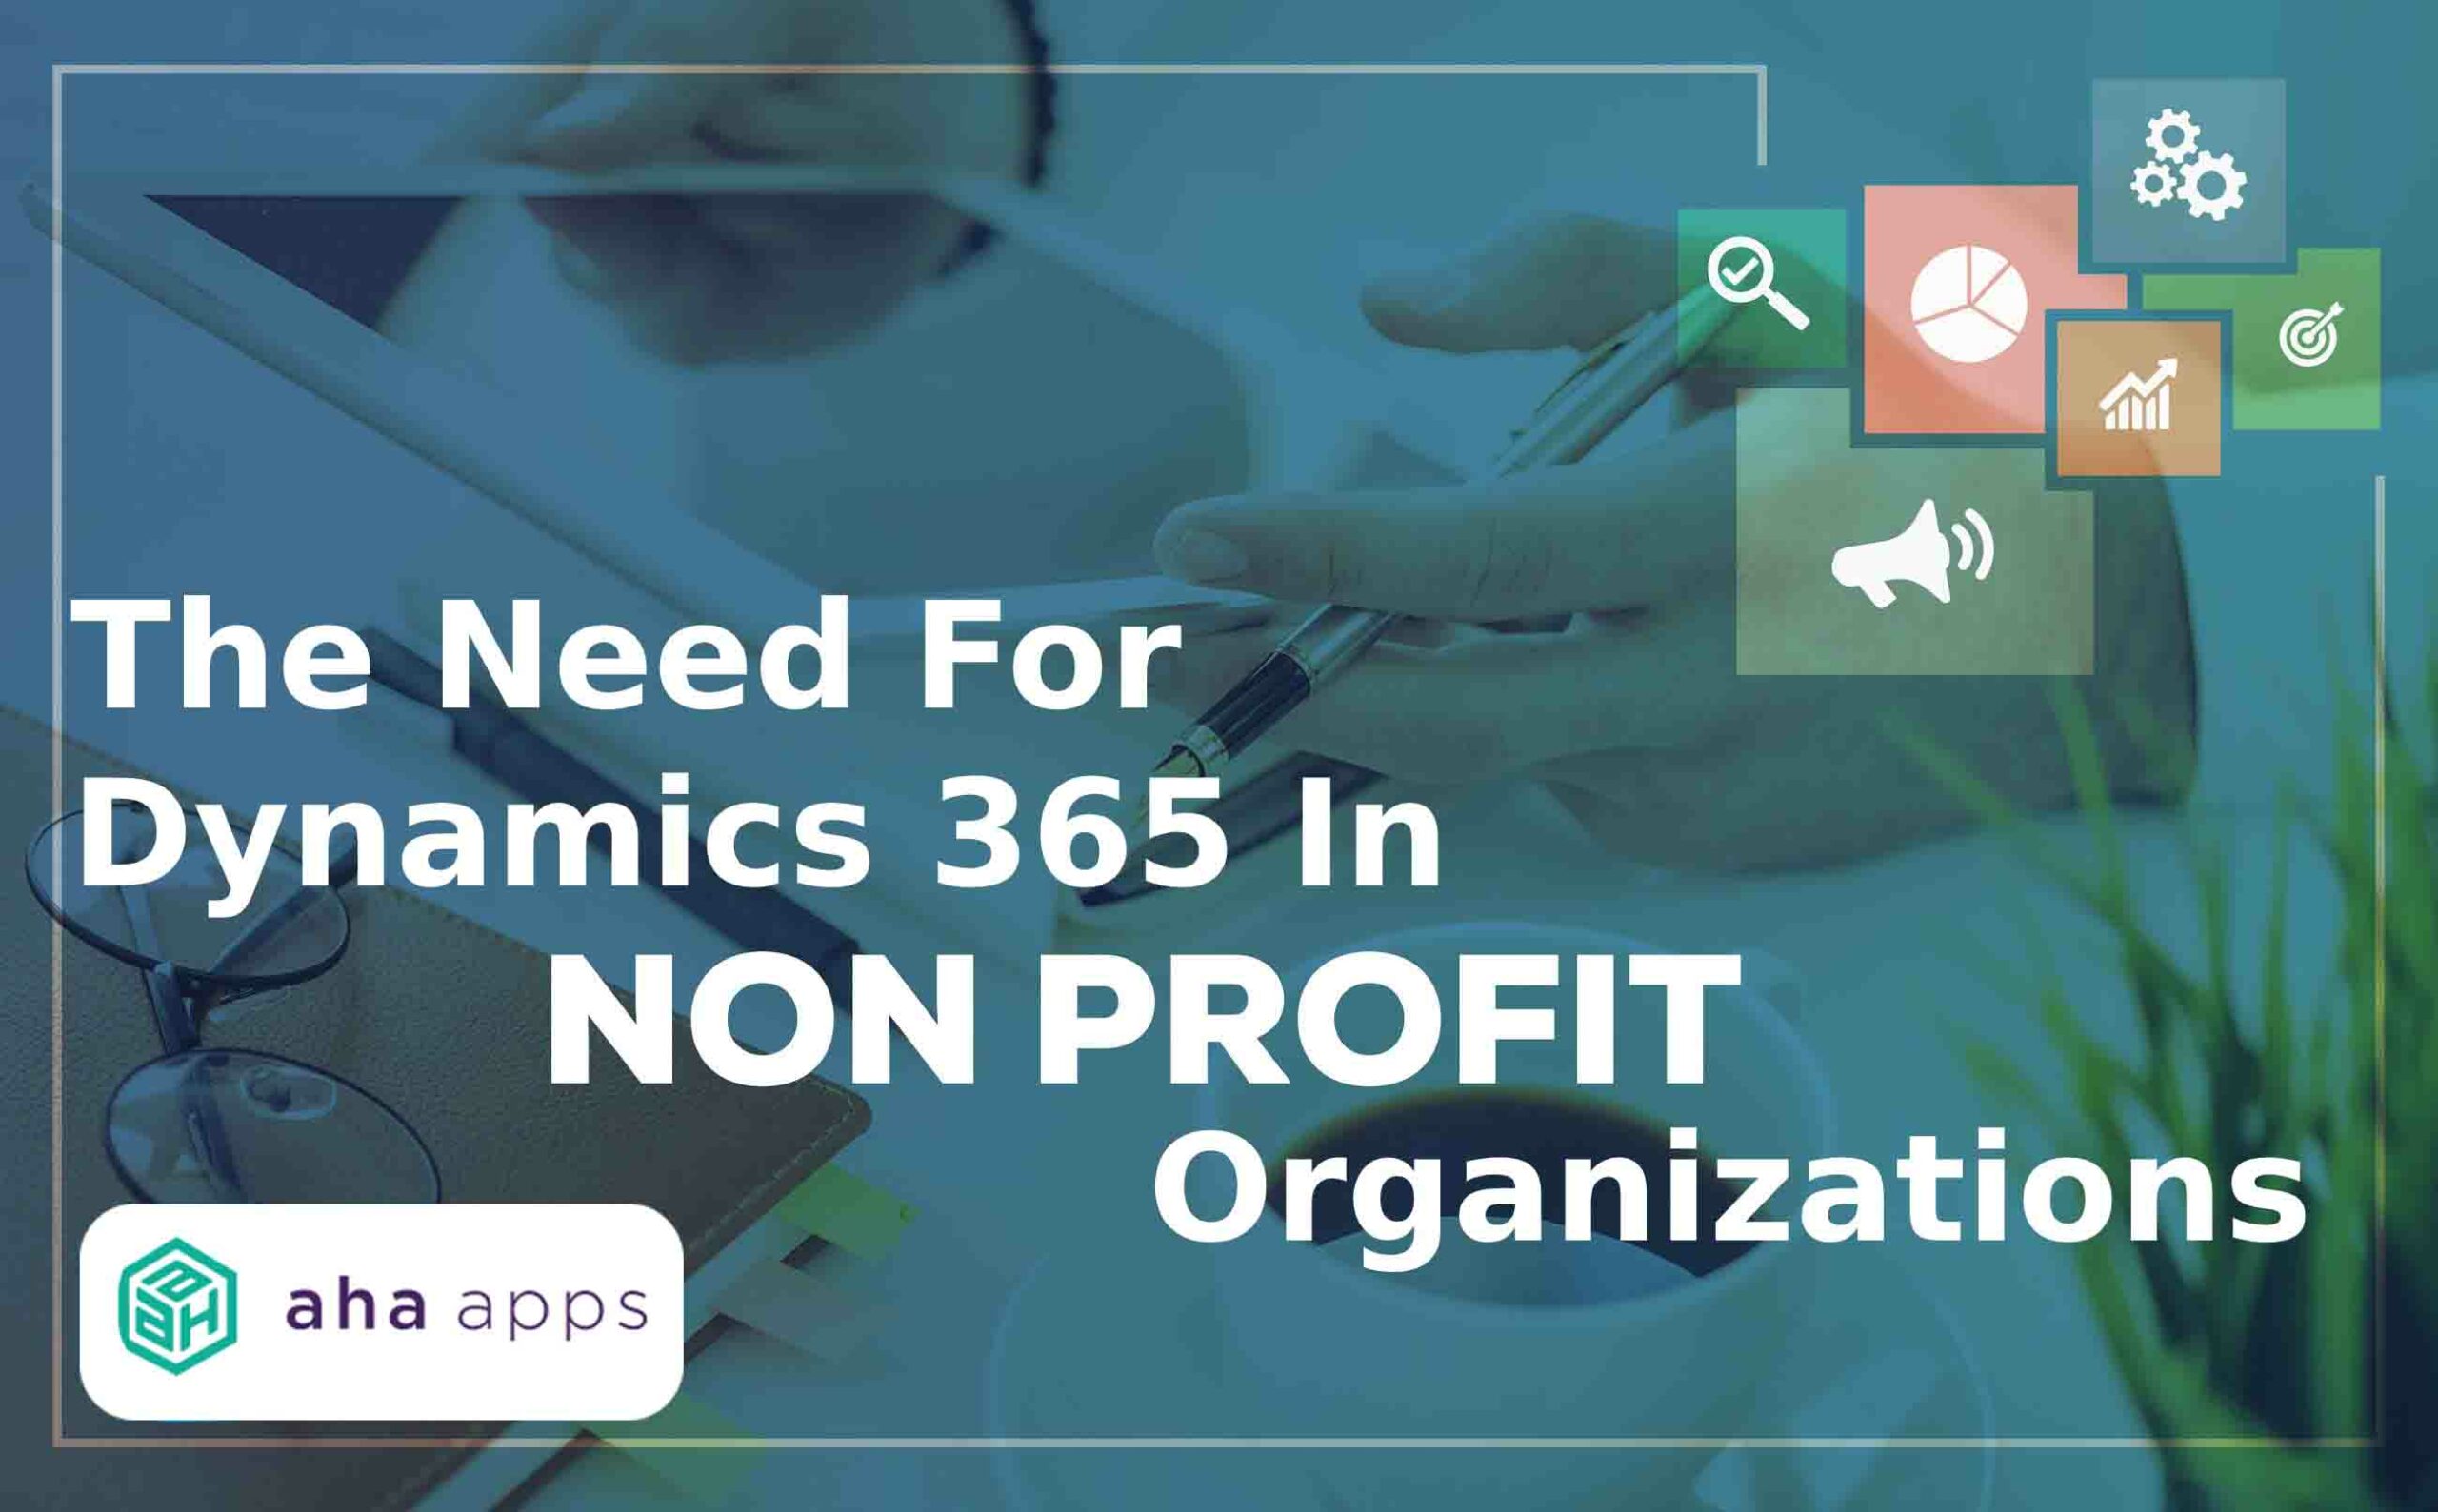 The need for Dynamics 365 in non profit organizations - AhaApps